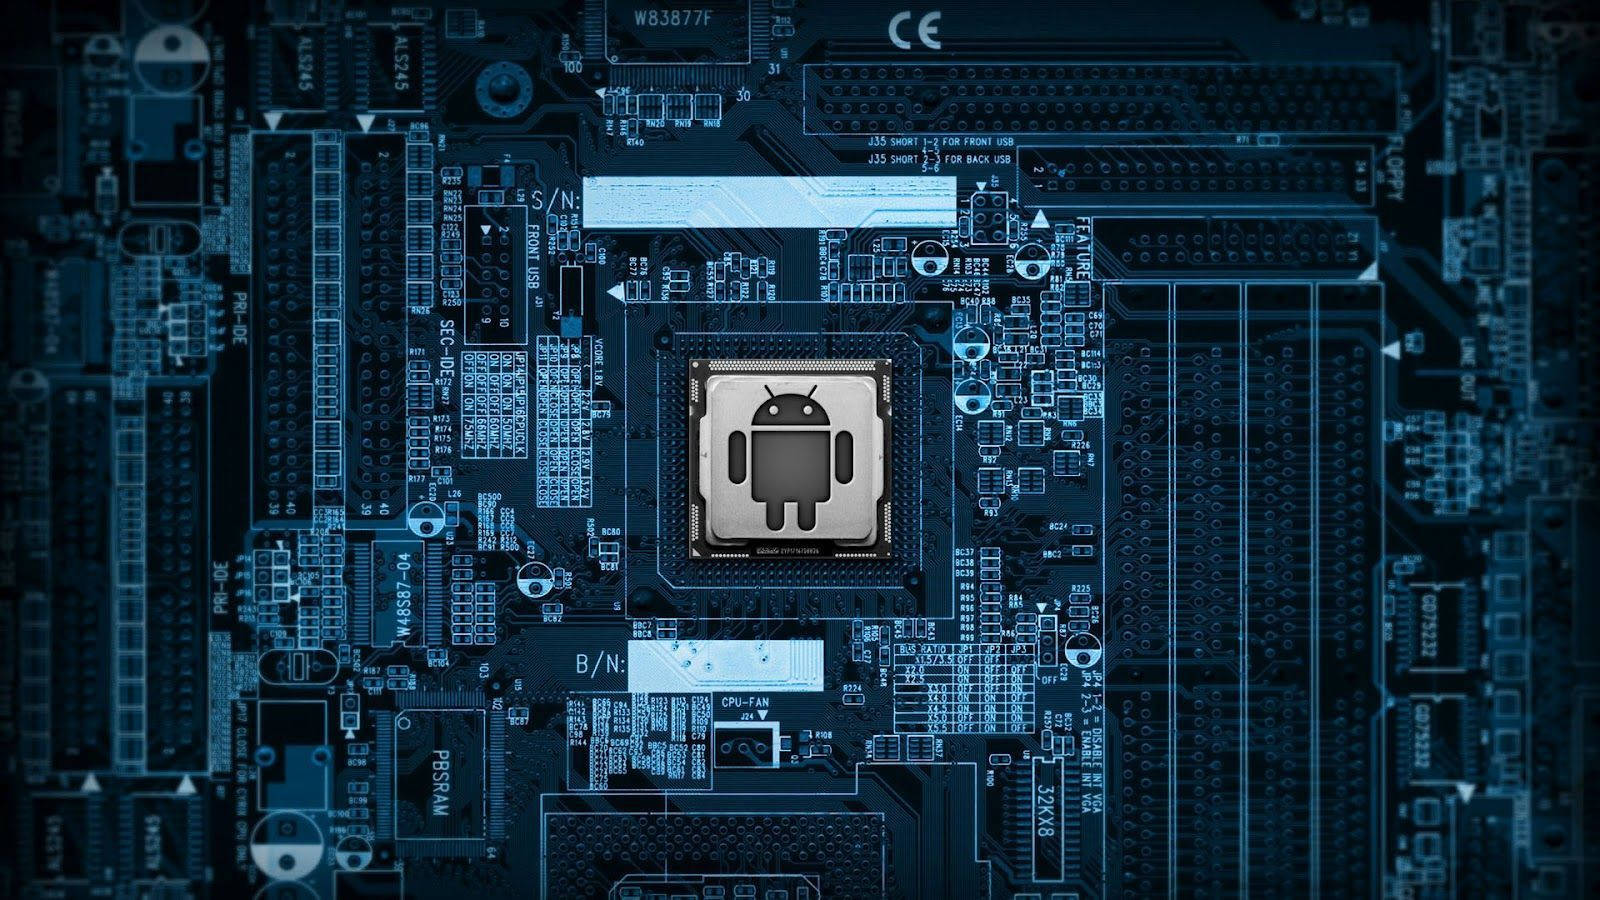 Feel the power of high-end technology. Wallpaper